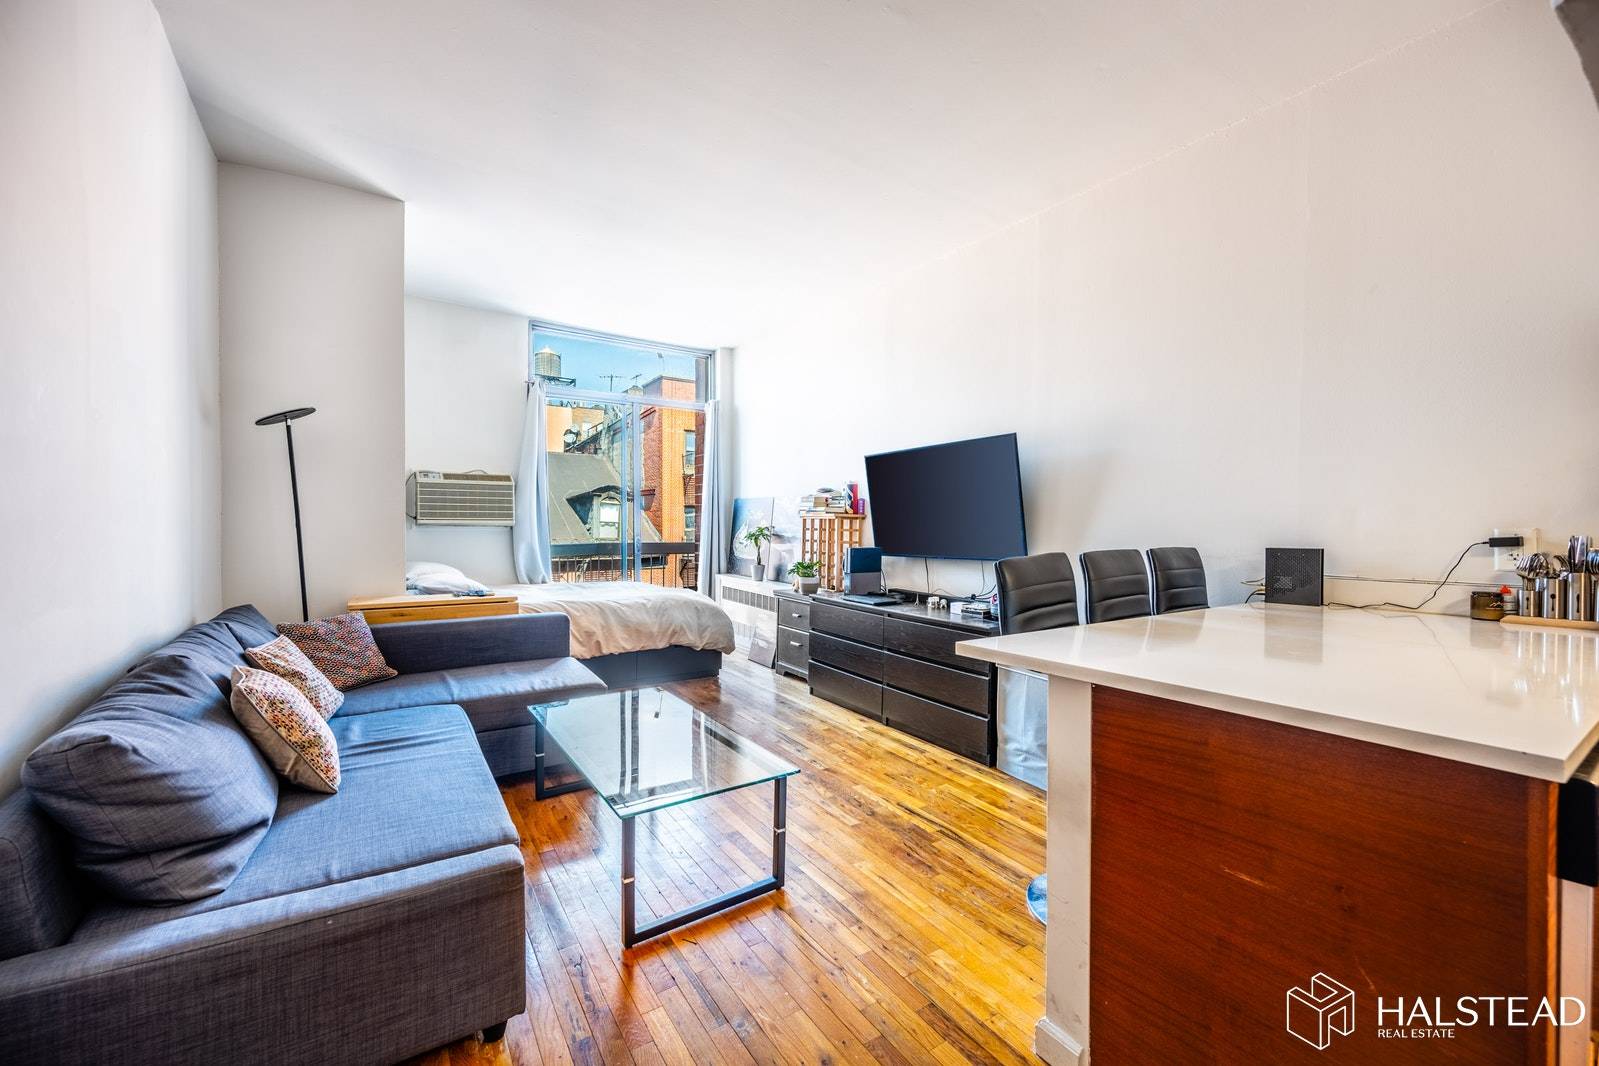 Come see this spacious Loft like studio apartment with 9.